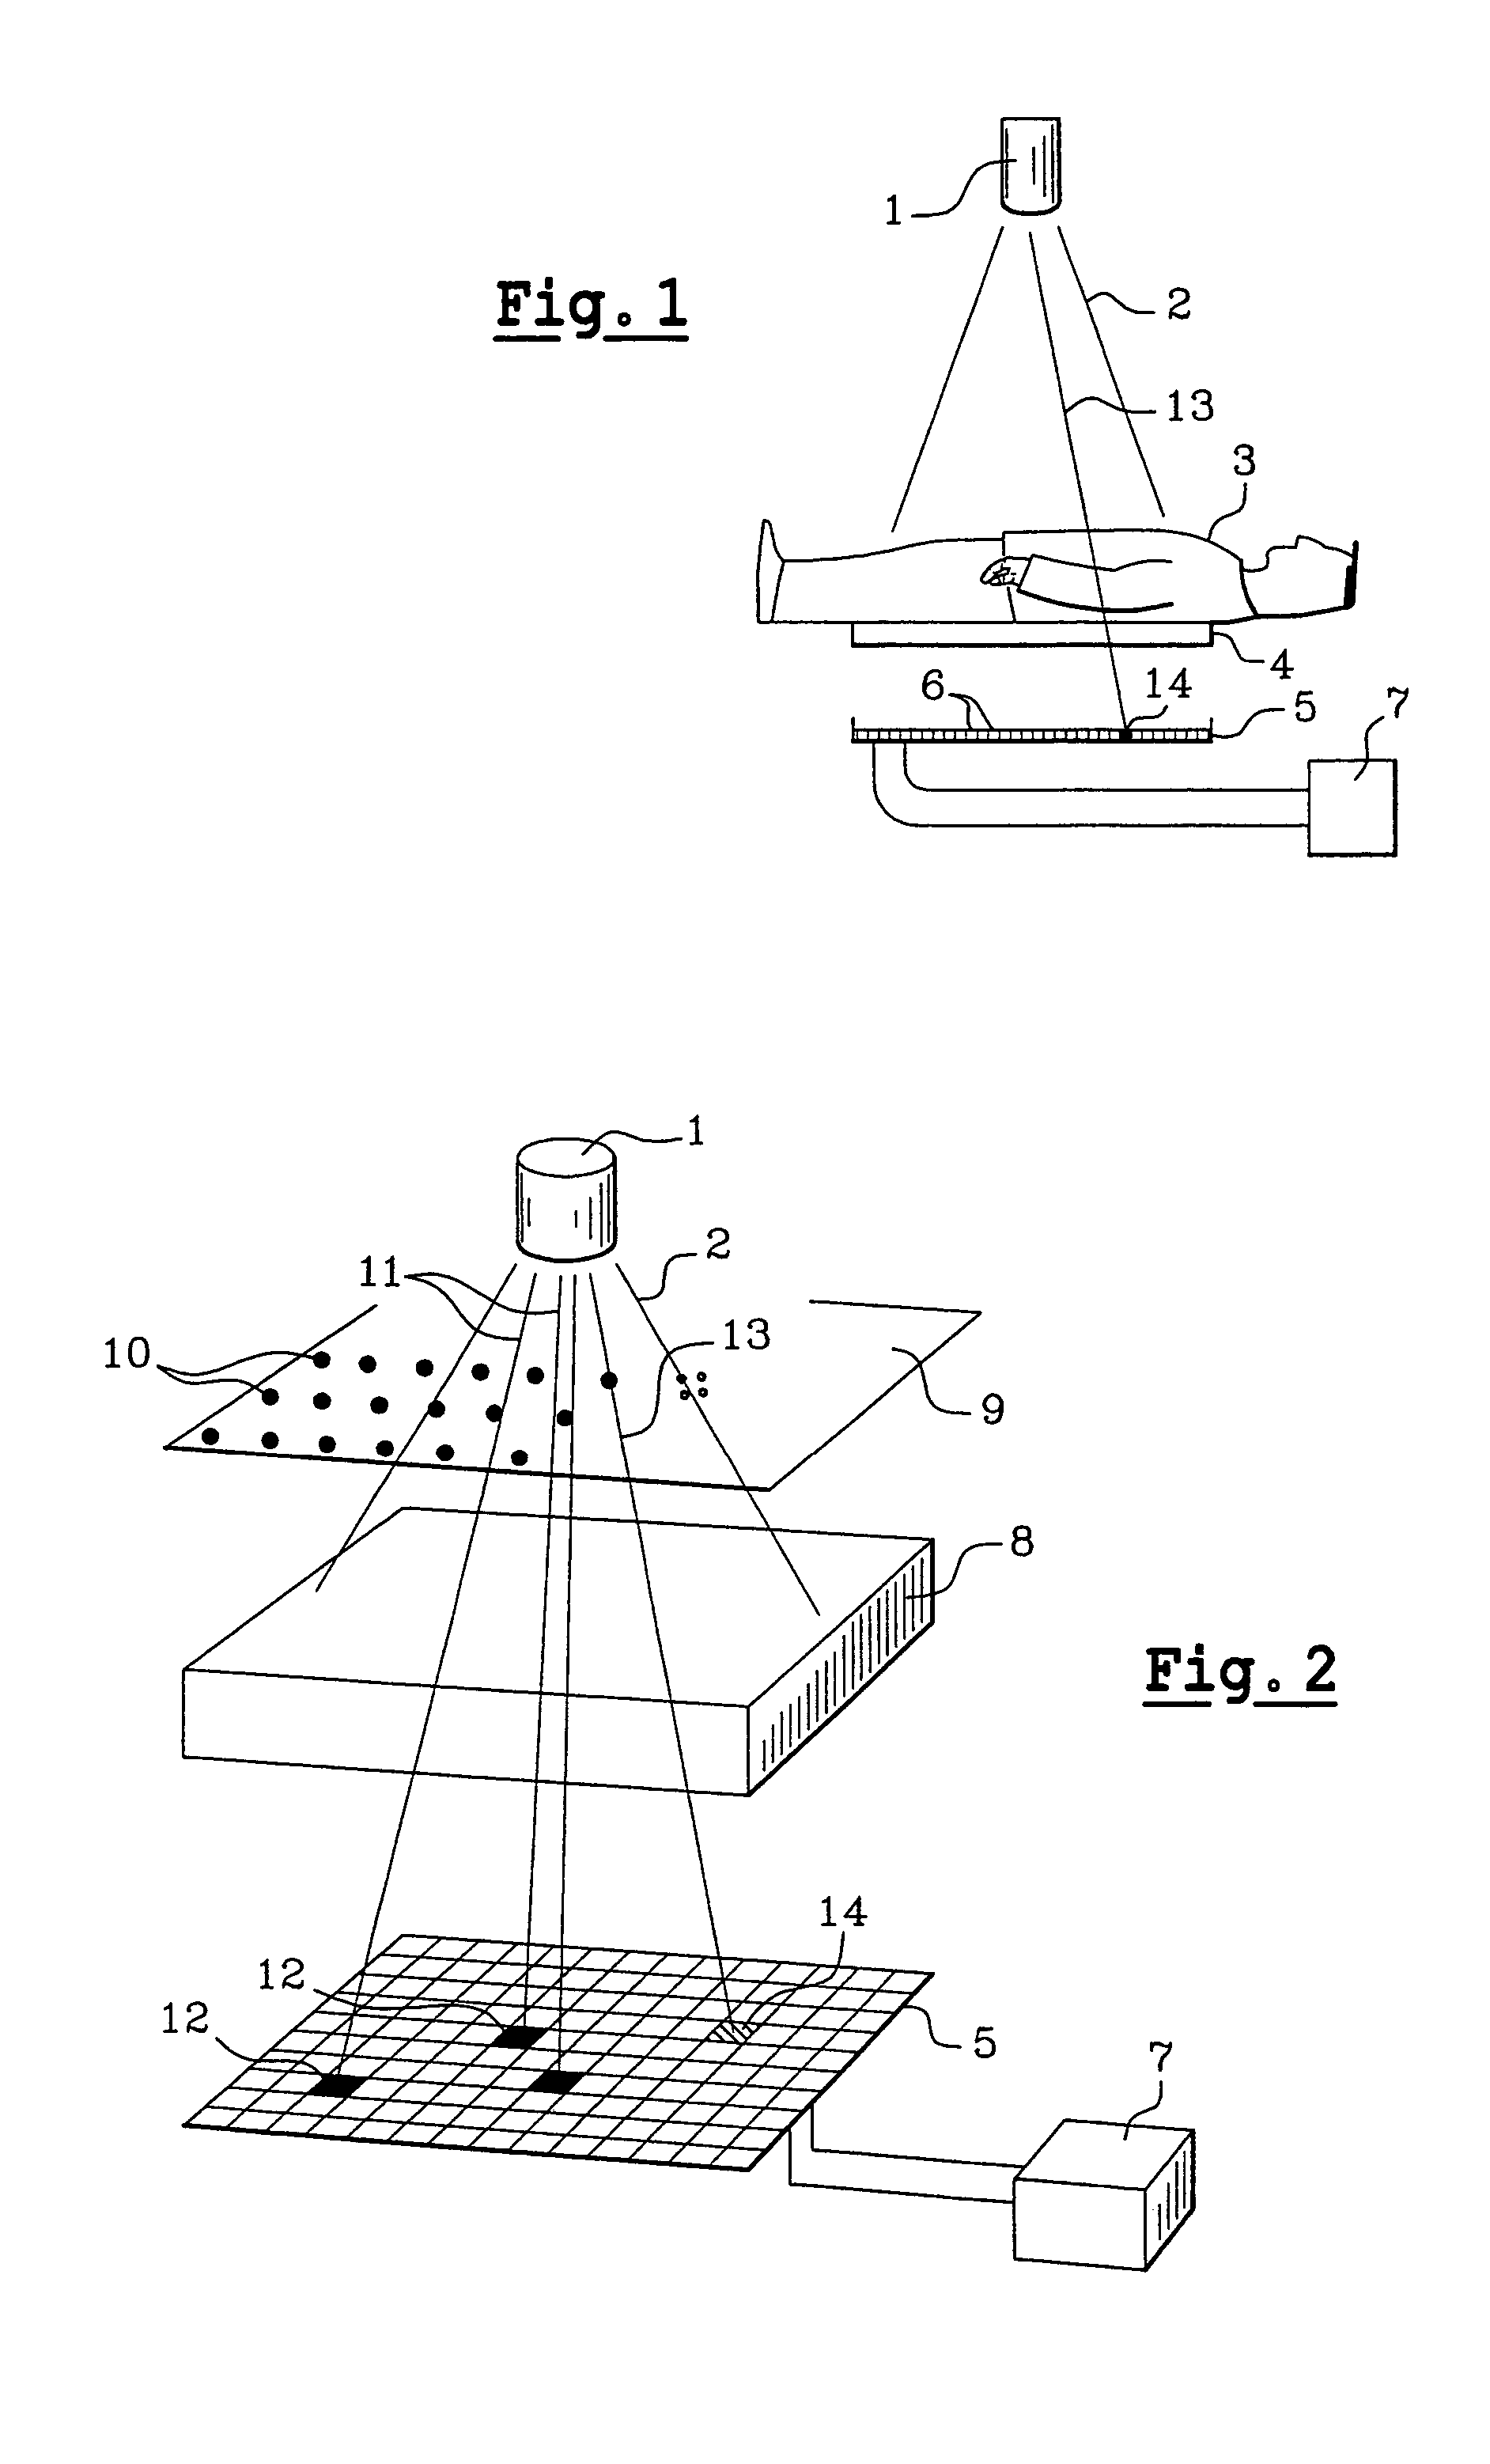 Method for estimating a scattered radiation, particularly to correct tomography or bone densitometry measurements